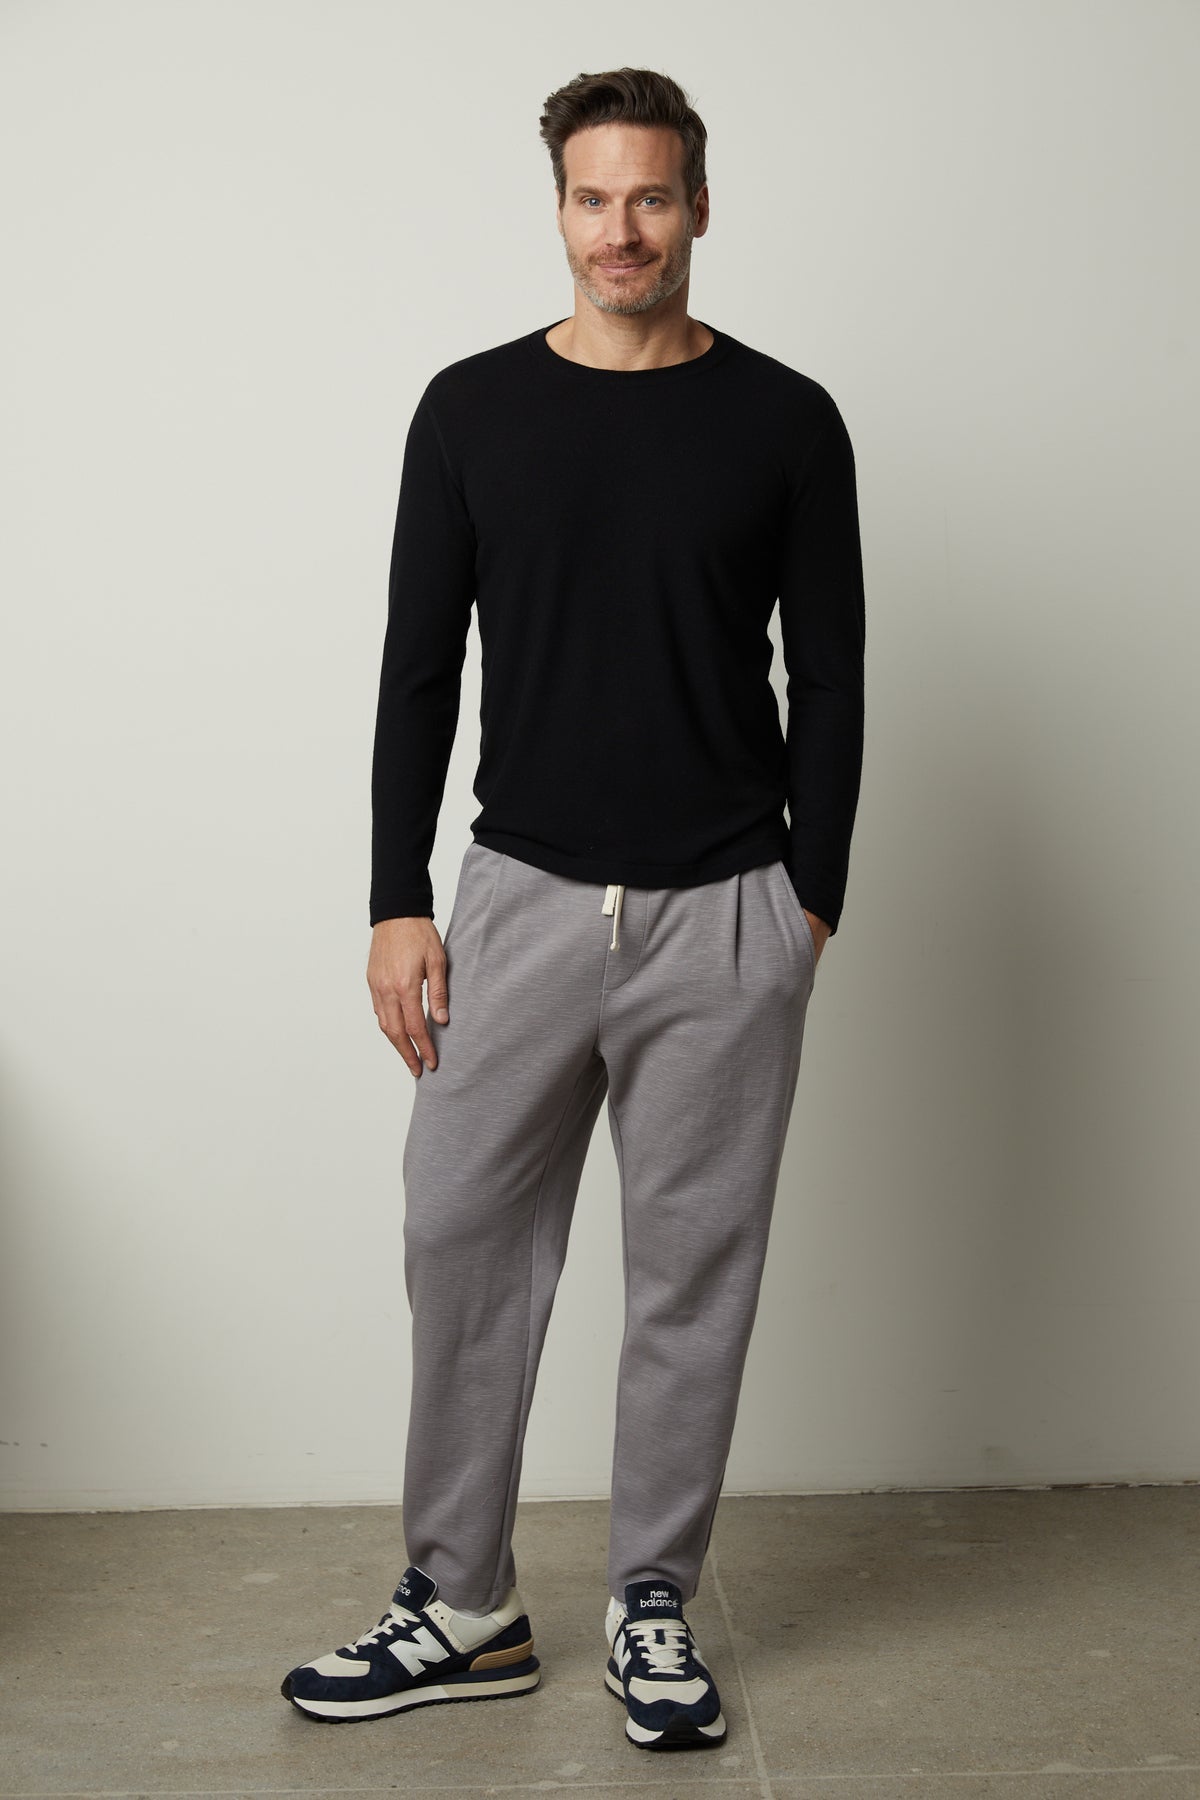 A man wearing a Velvet by Graham & Spencer modern comfort black sweater and signature cozy grey sweatpants.-35782717636801